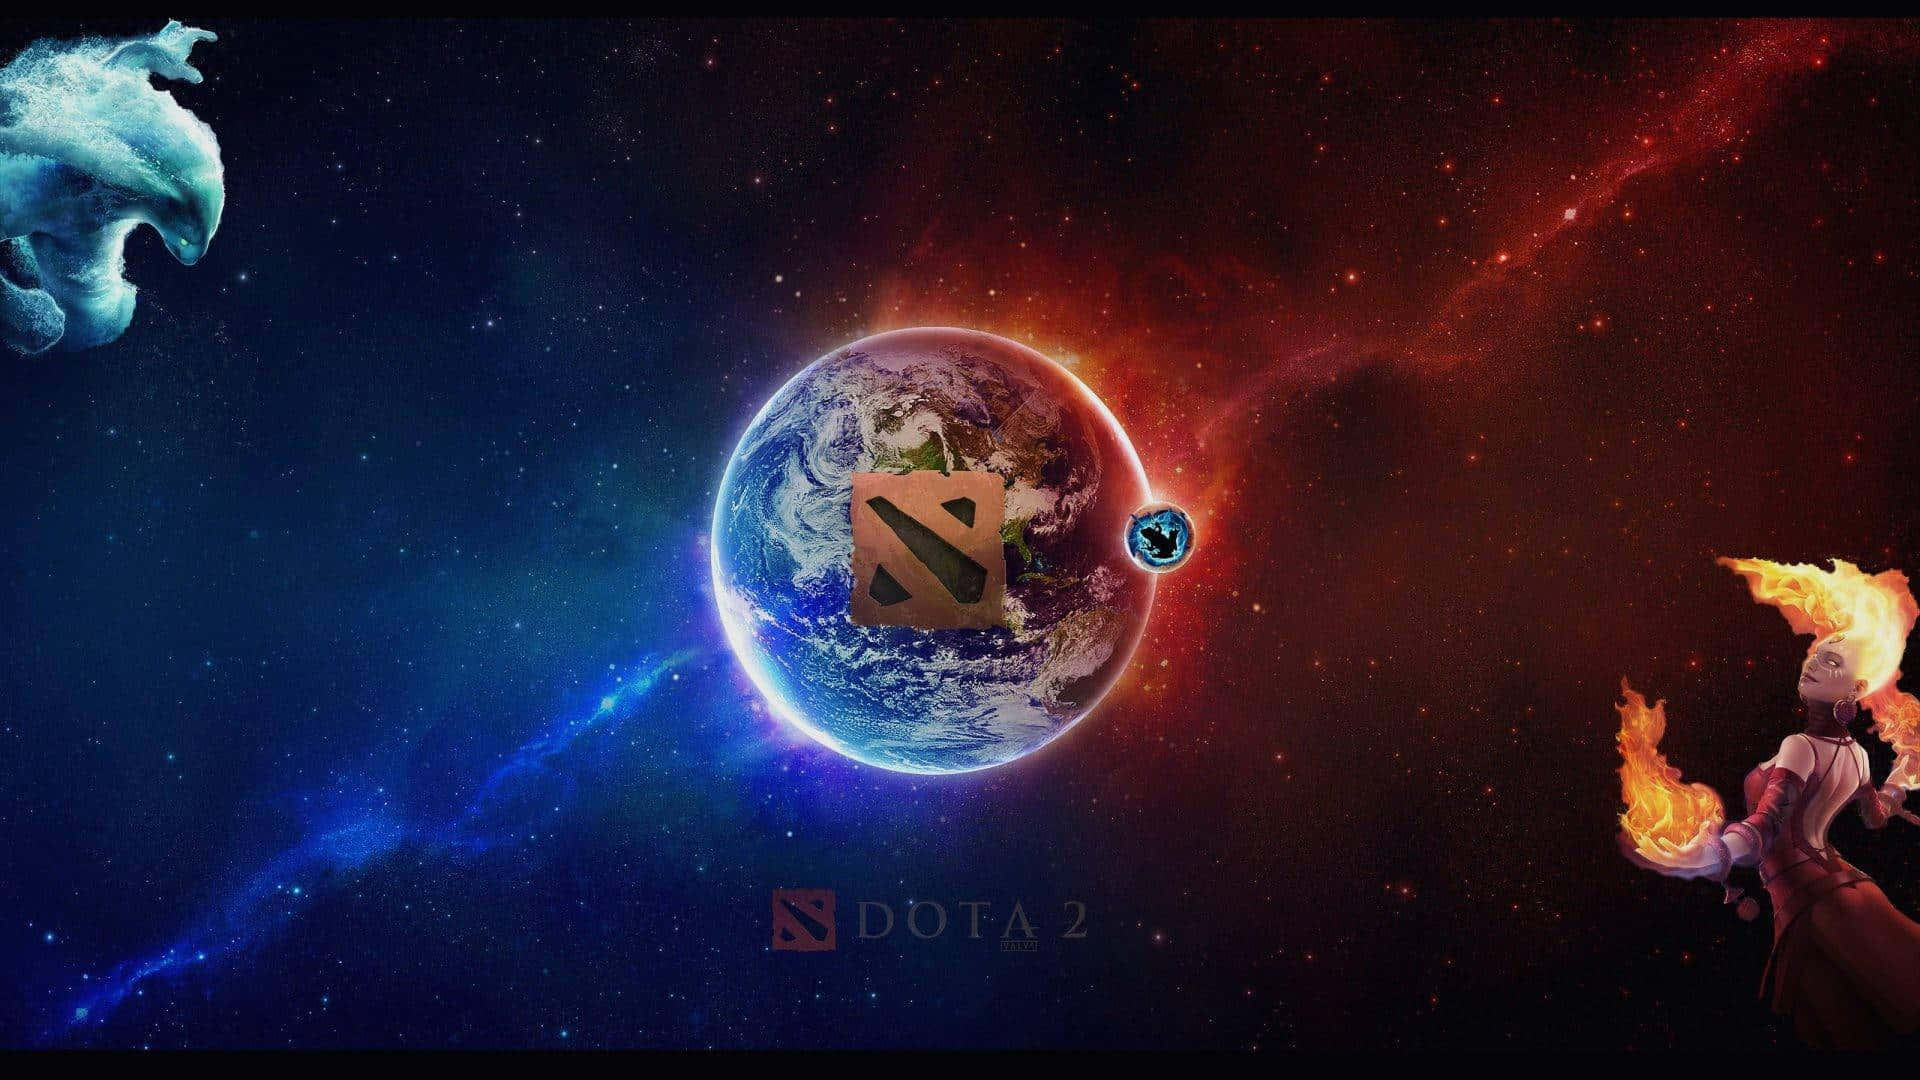 Let's Win the Battle with Best Dota 2!